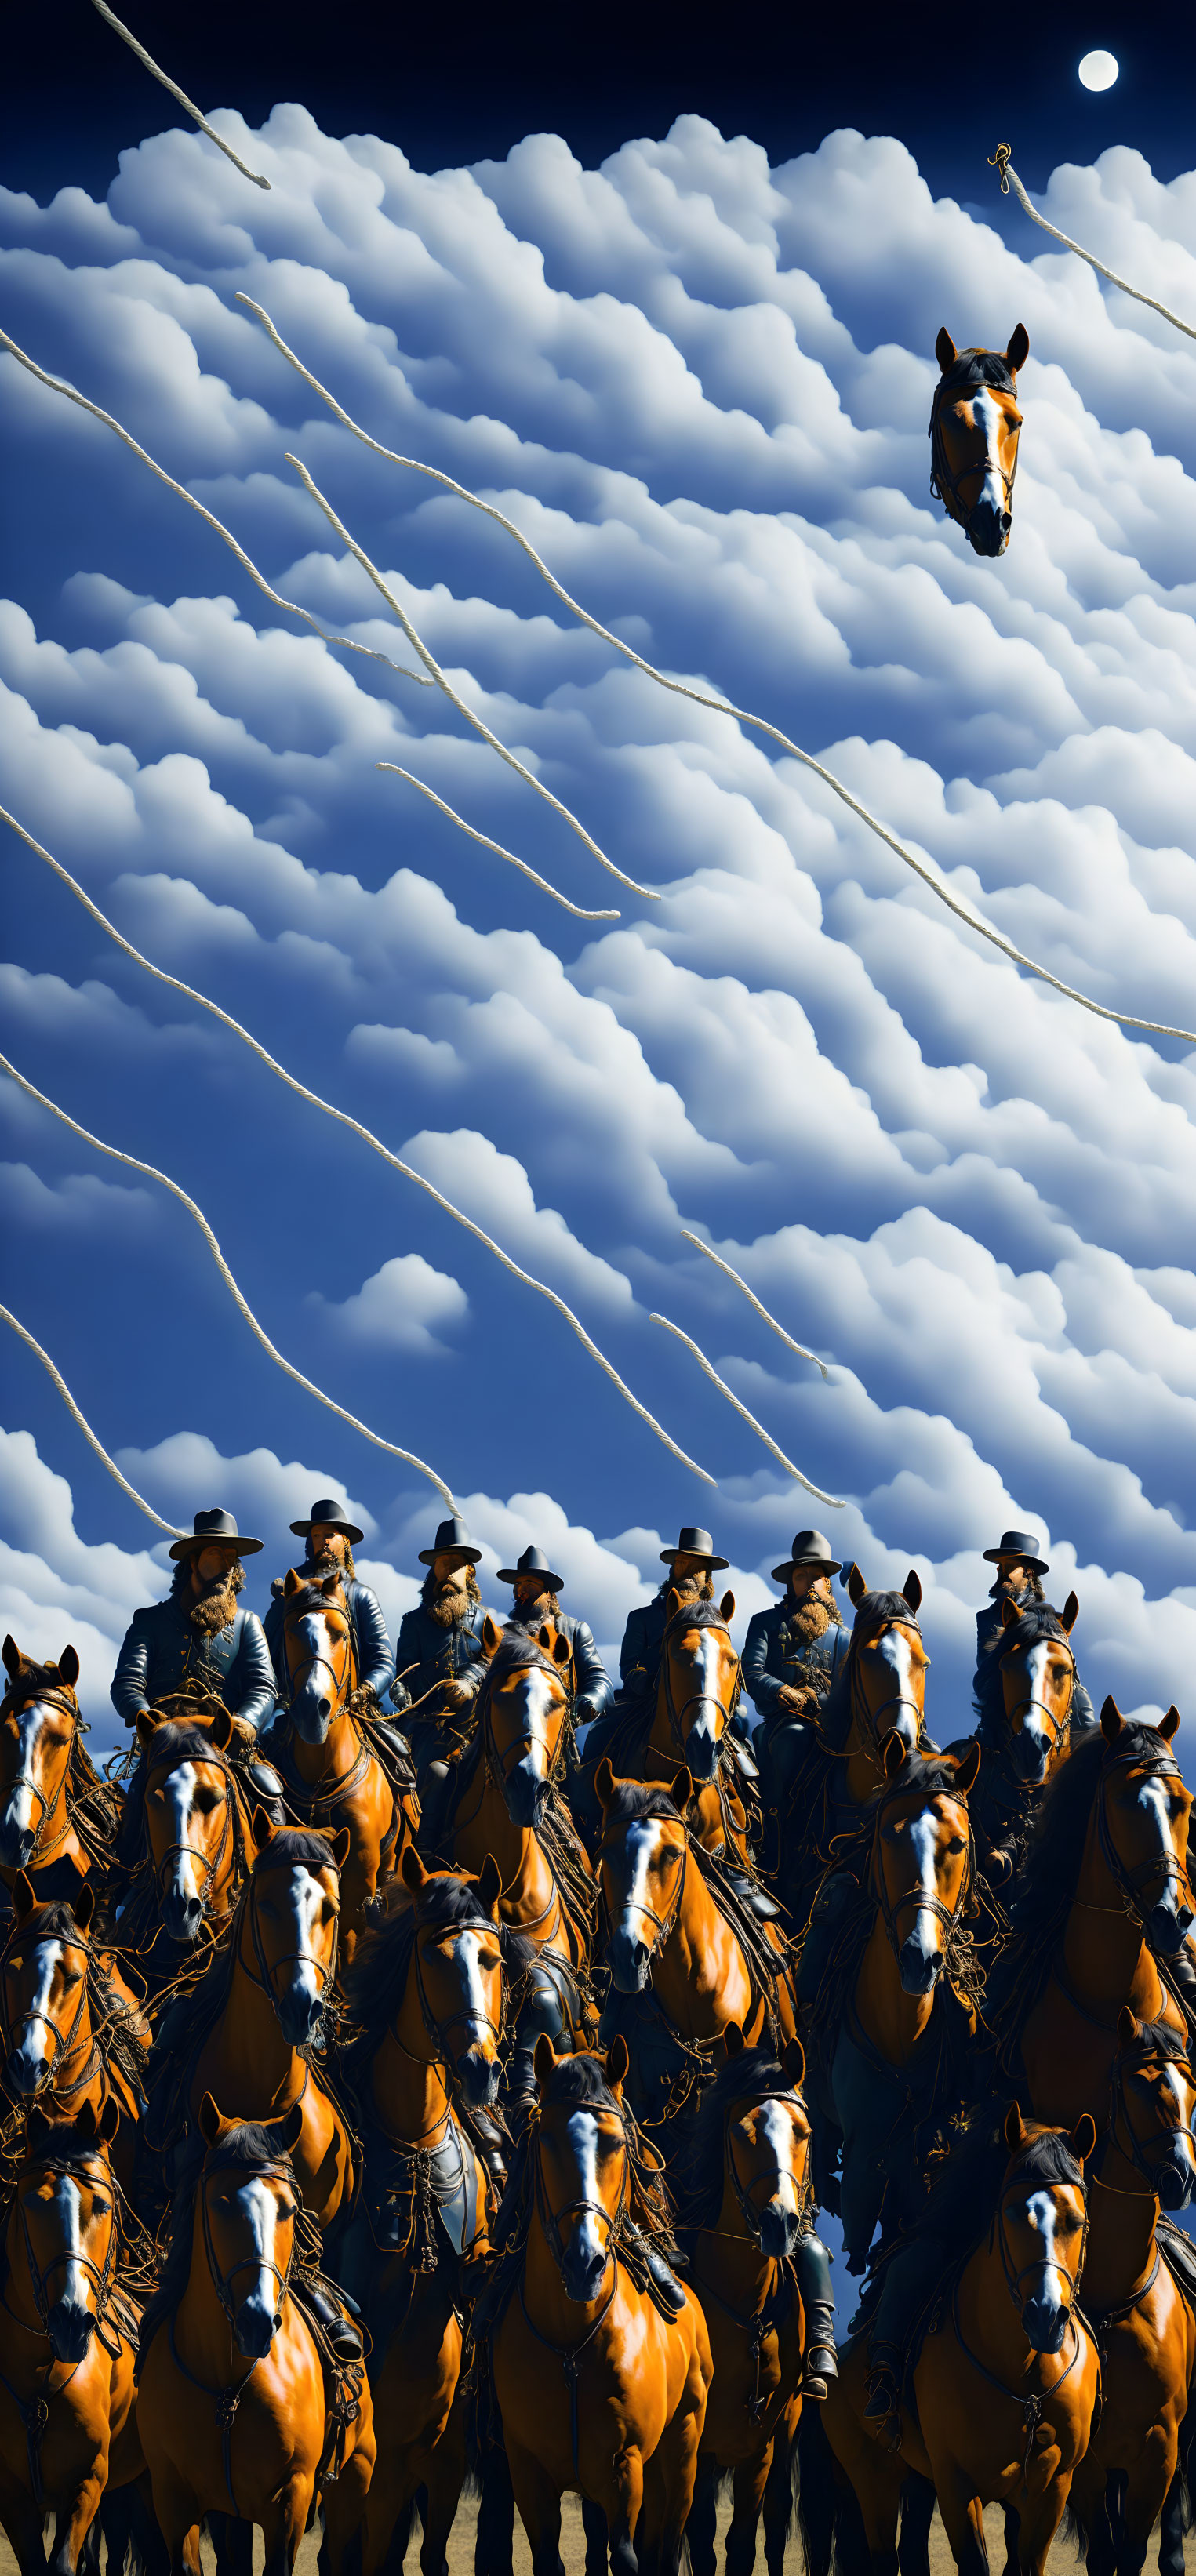 Surreal cowboy riders on chestnut horses stacking into the sky